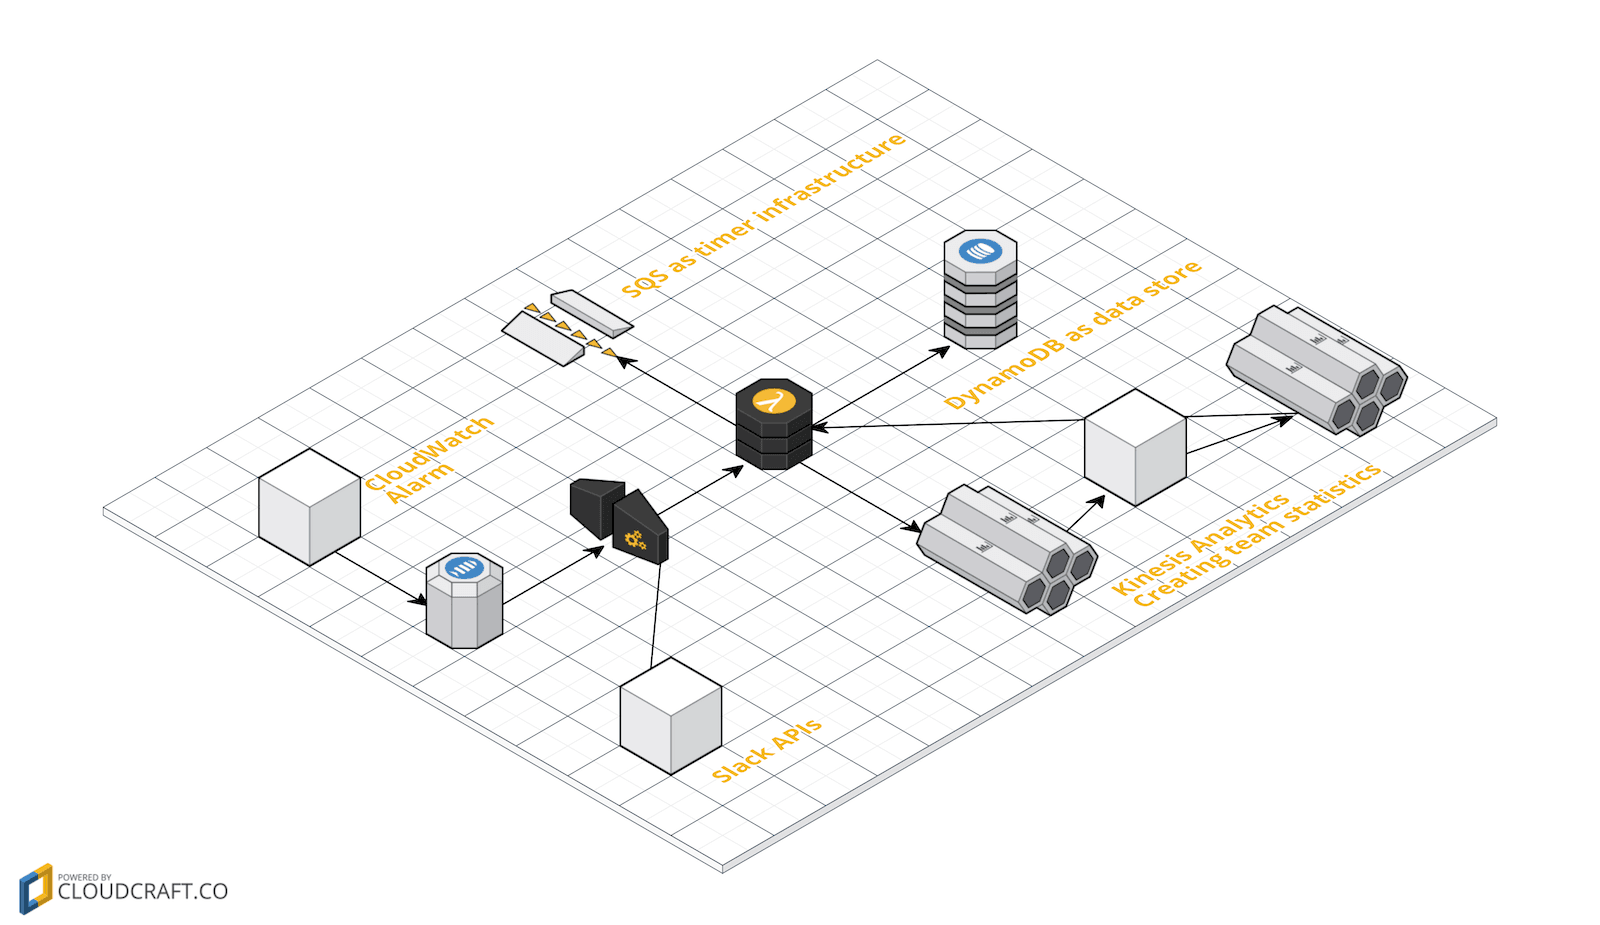 Serverless Architecture of marbot